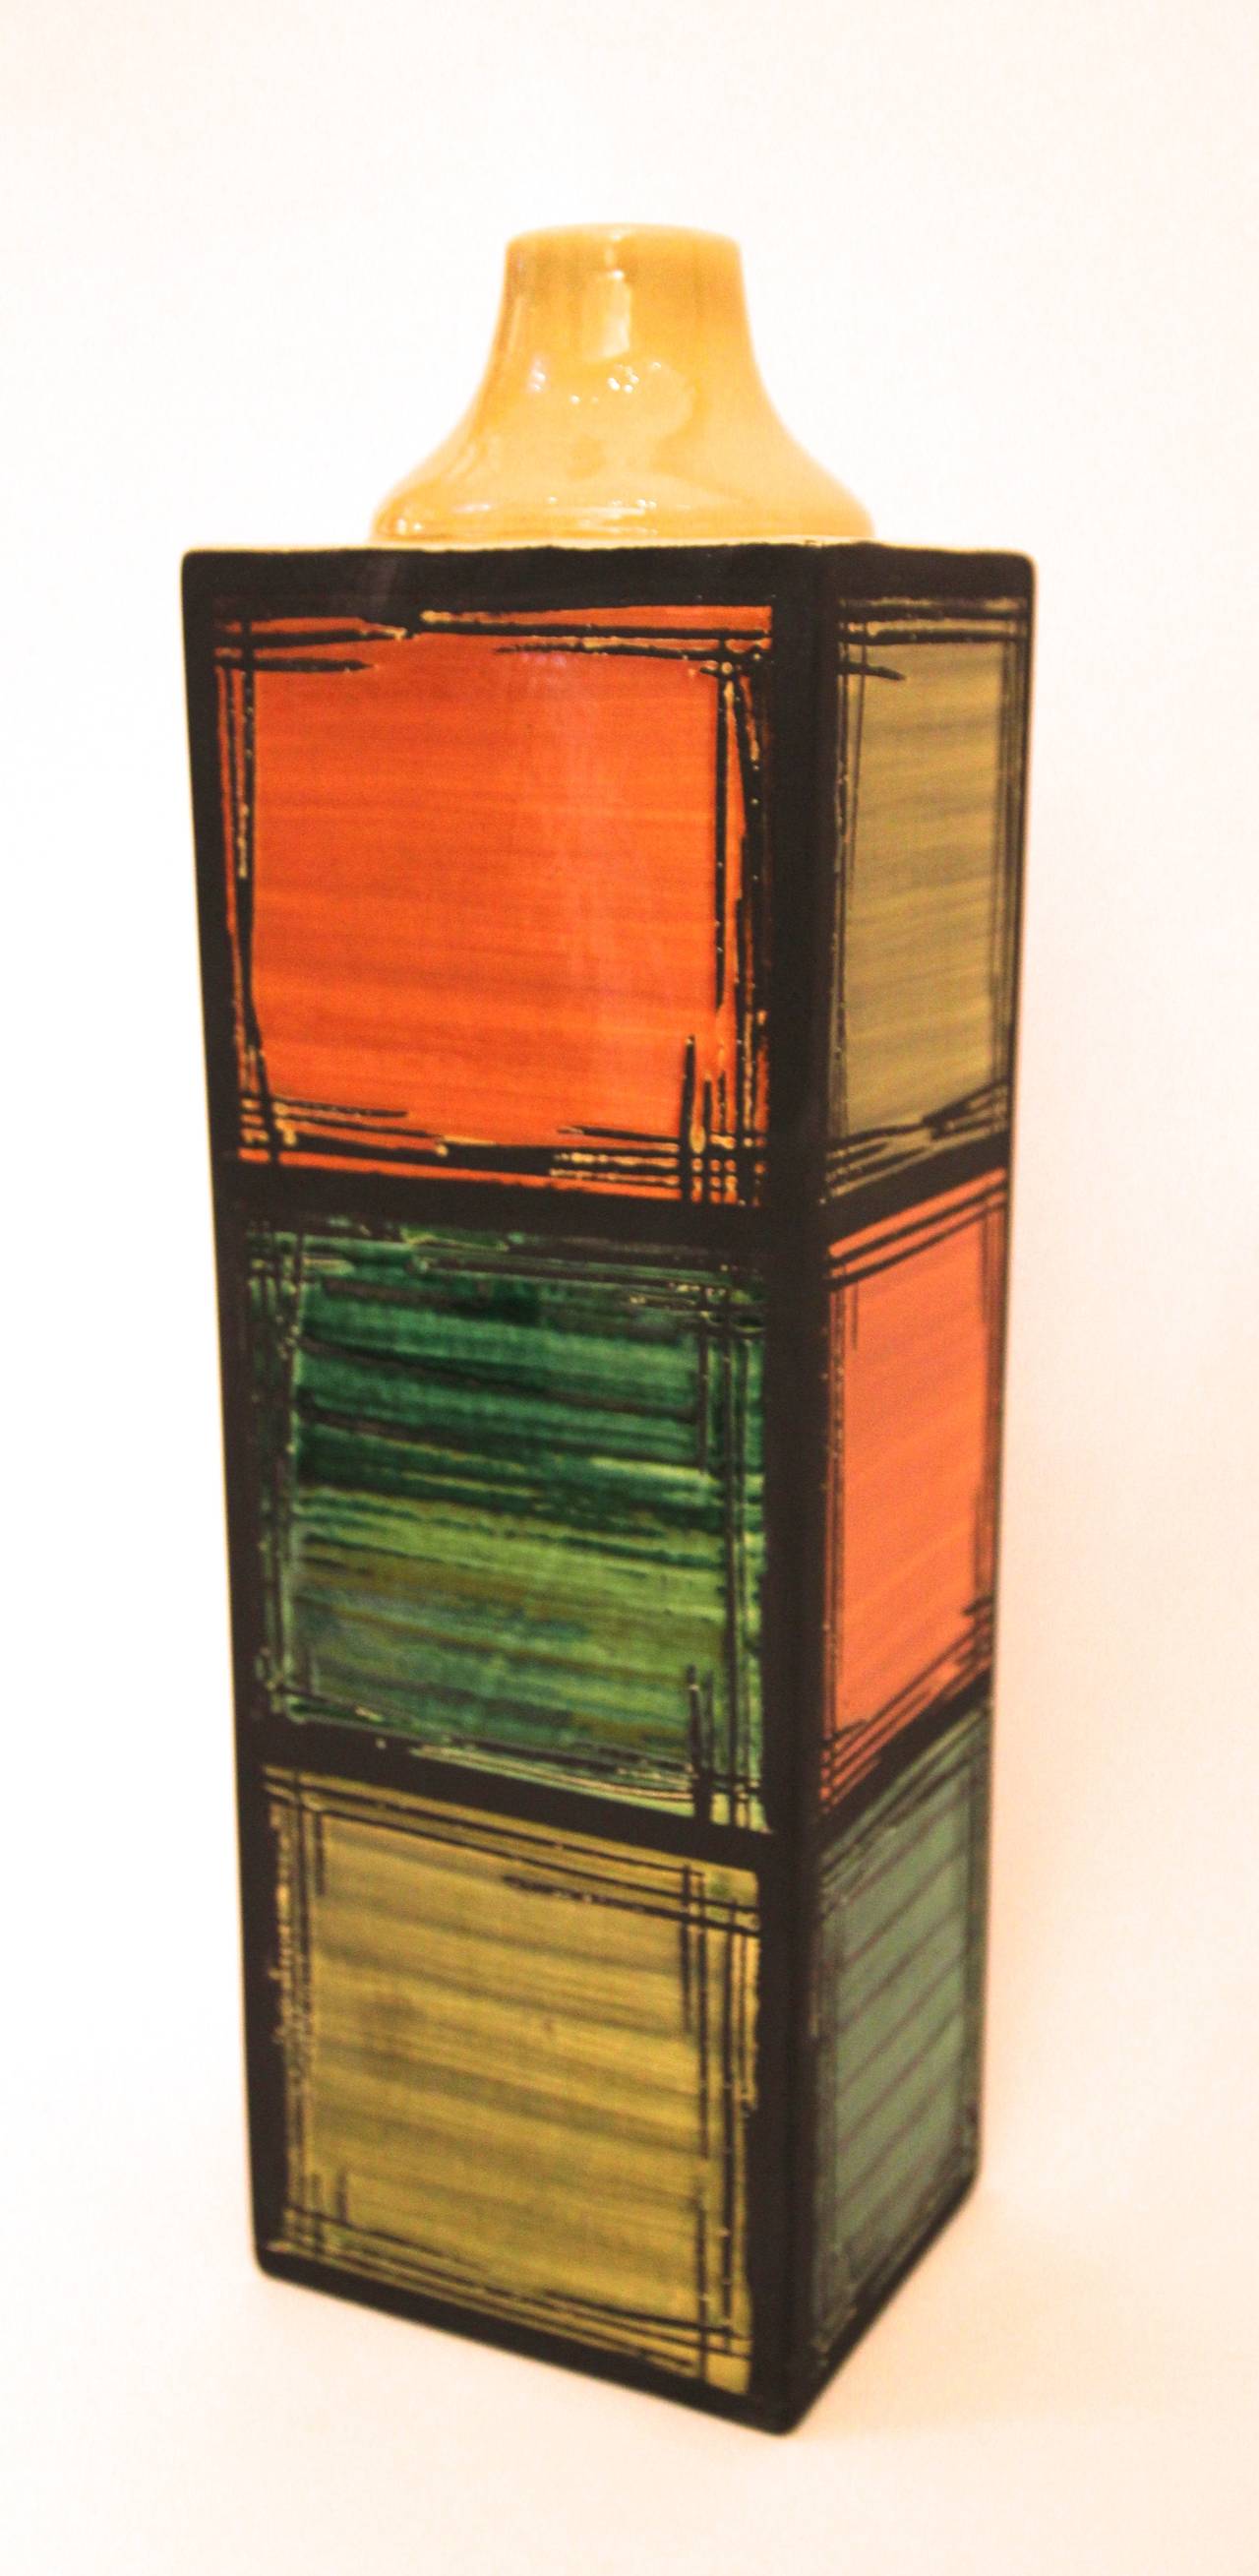 Cau.G Bitossi and Figli, Bottle,
Glazed ceramic, 
Decoration of three orange, green and yellow squares,
Signed, located and numbered 108/149 under the base, 
Italy, circa 1970.

Measures: Height 45 cm, Length 14 cm, Depth 11 cm.

The identity of